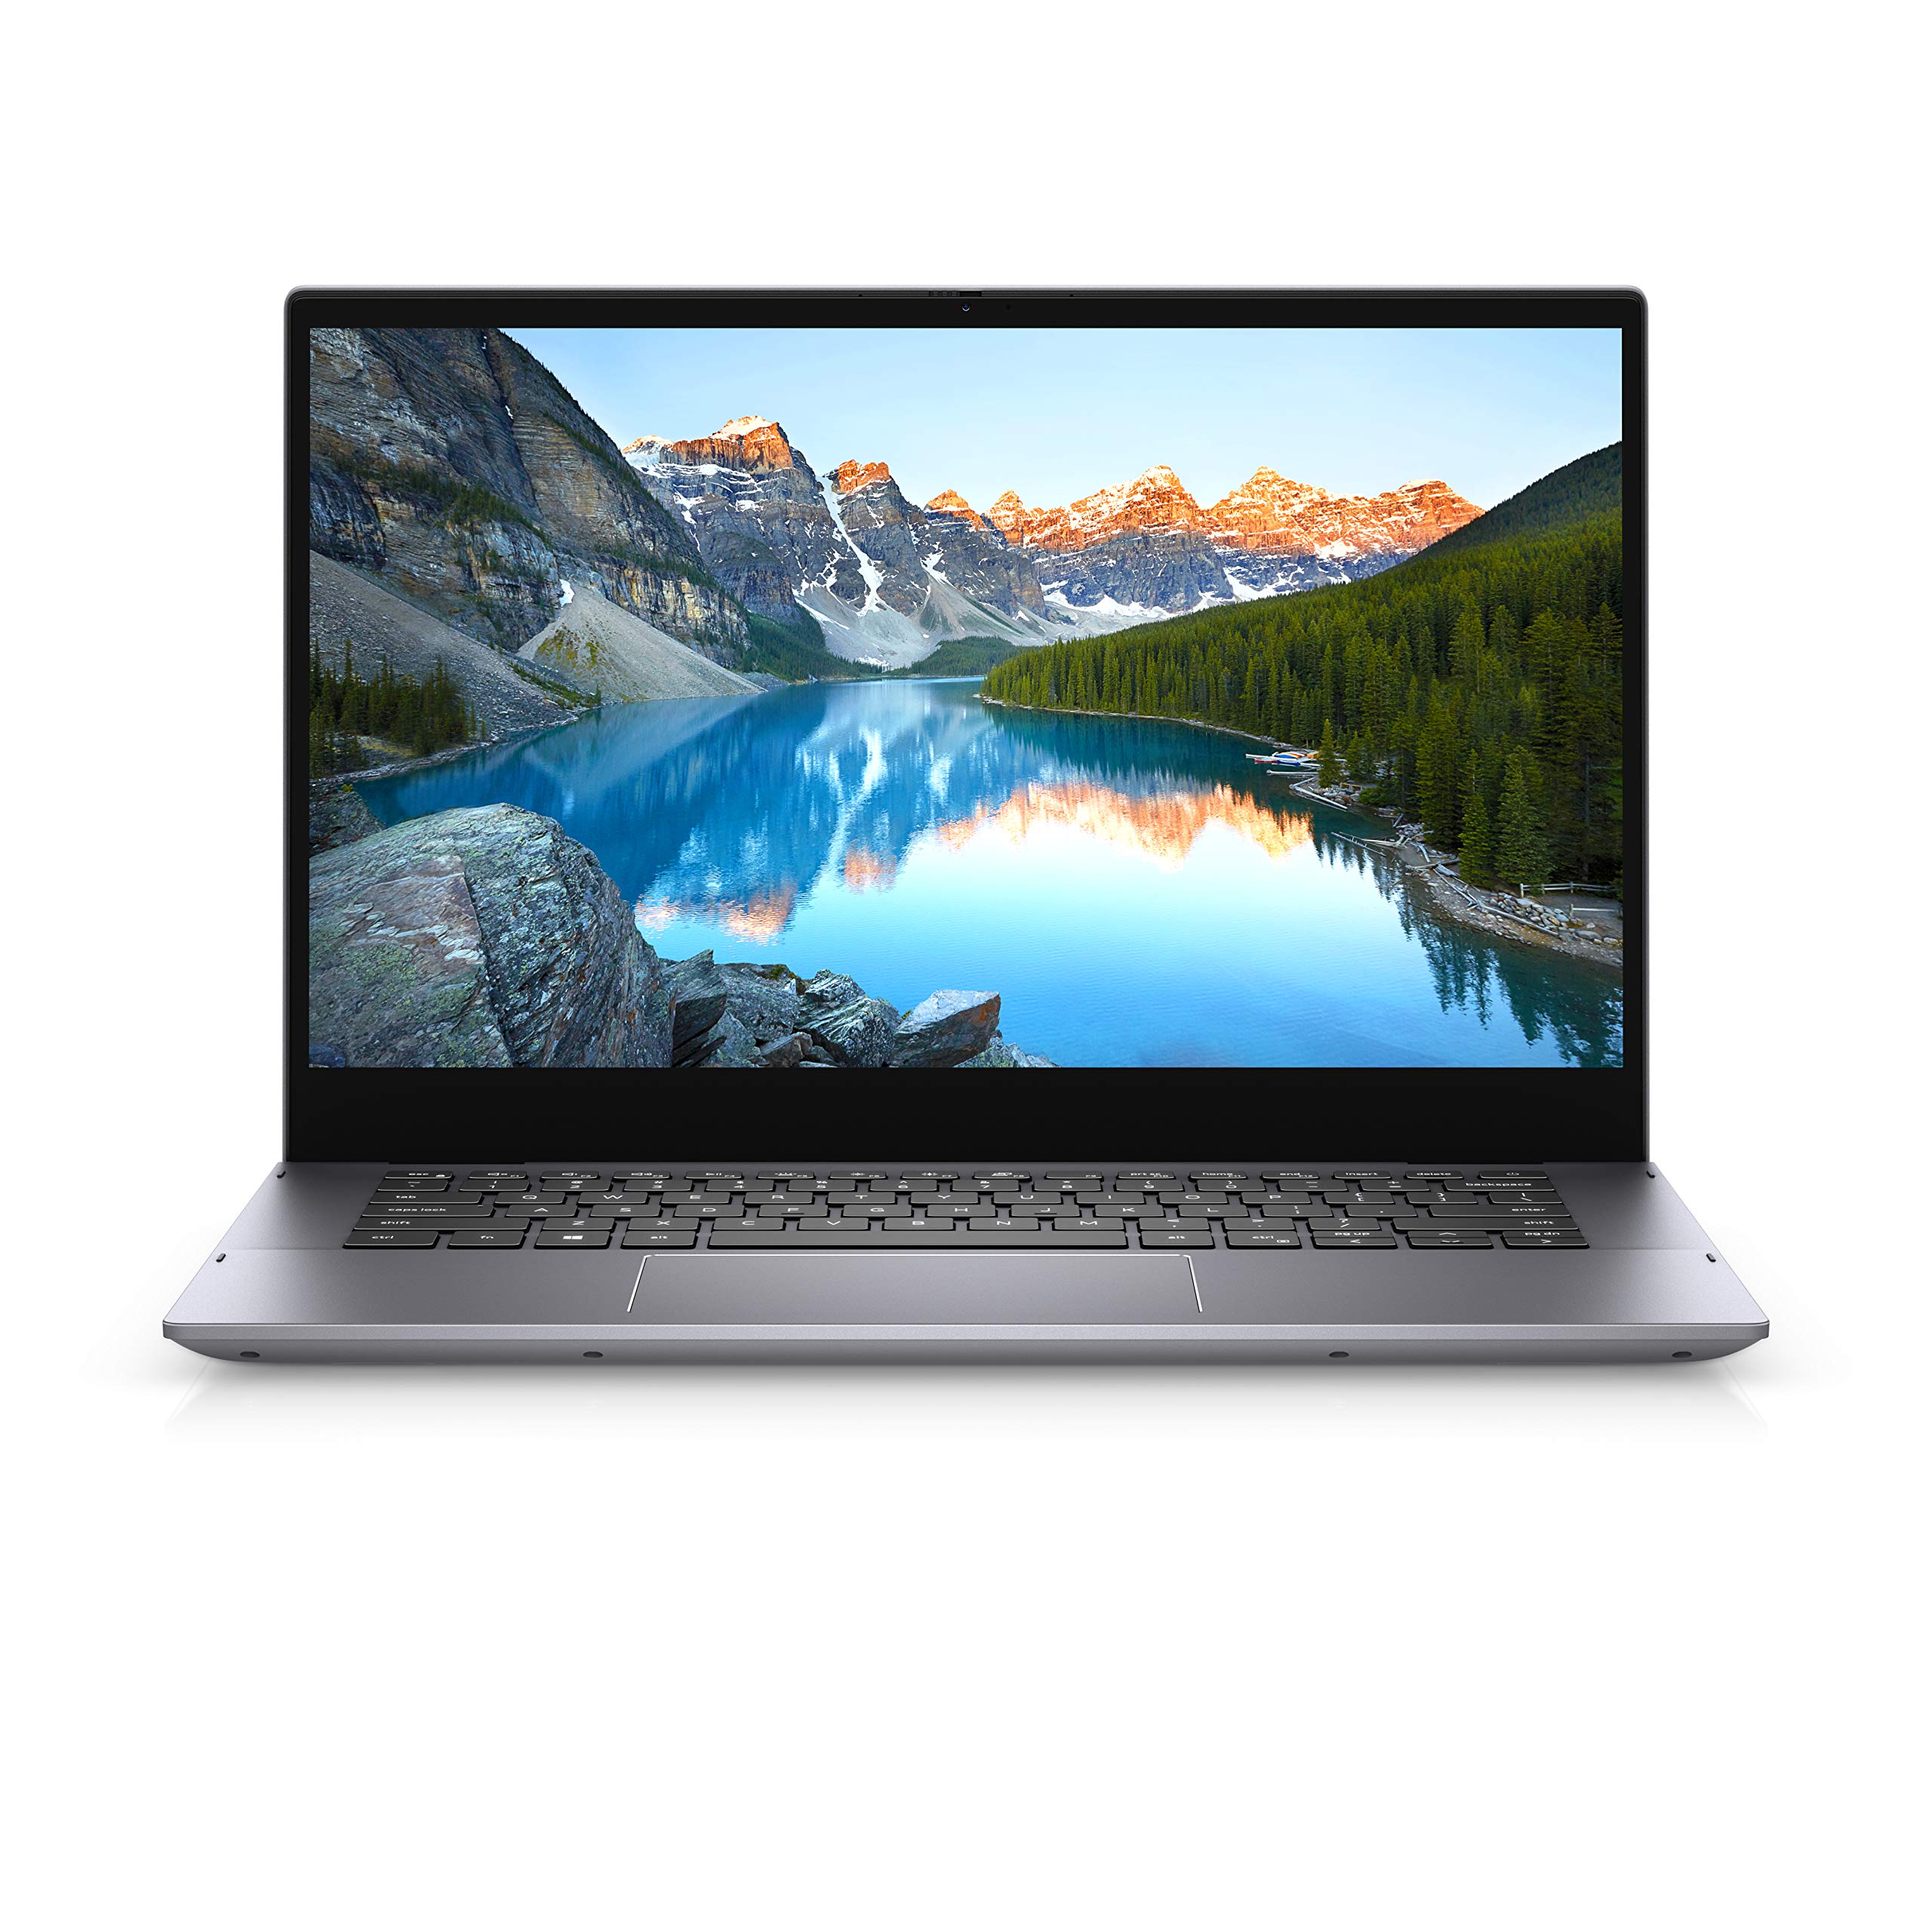 Dell Inspiron 14 5402 Notebook